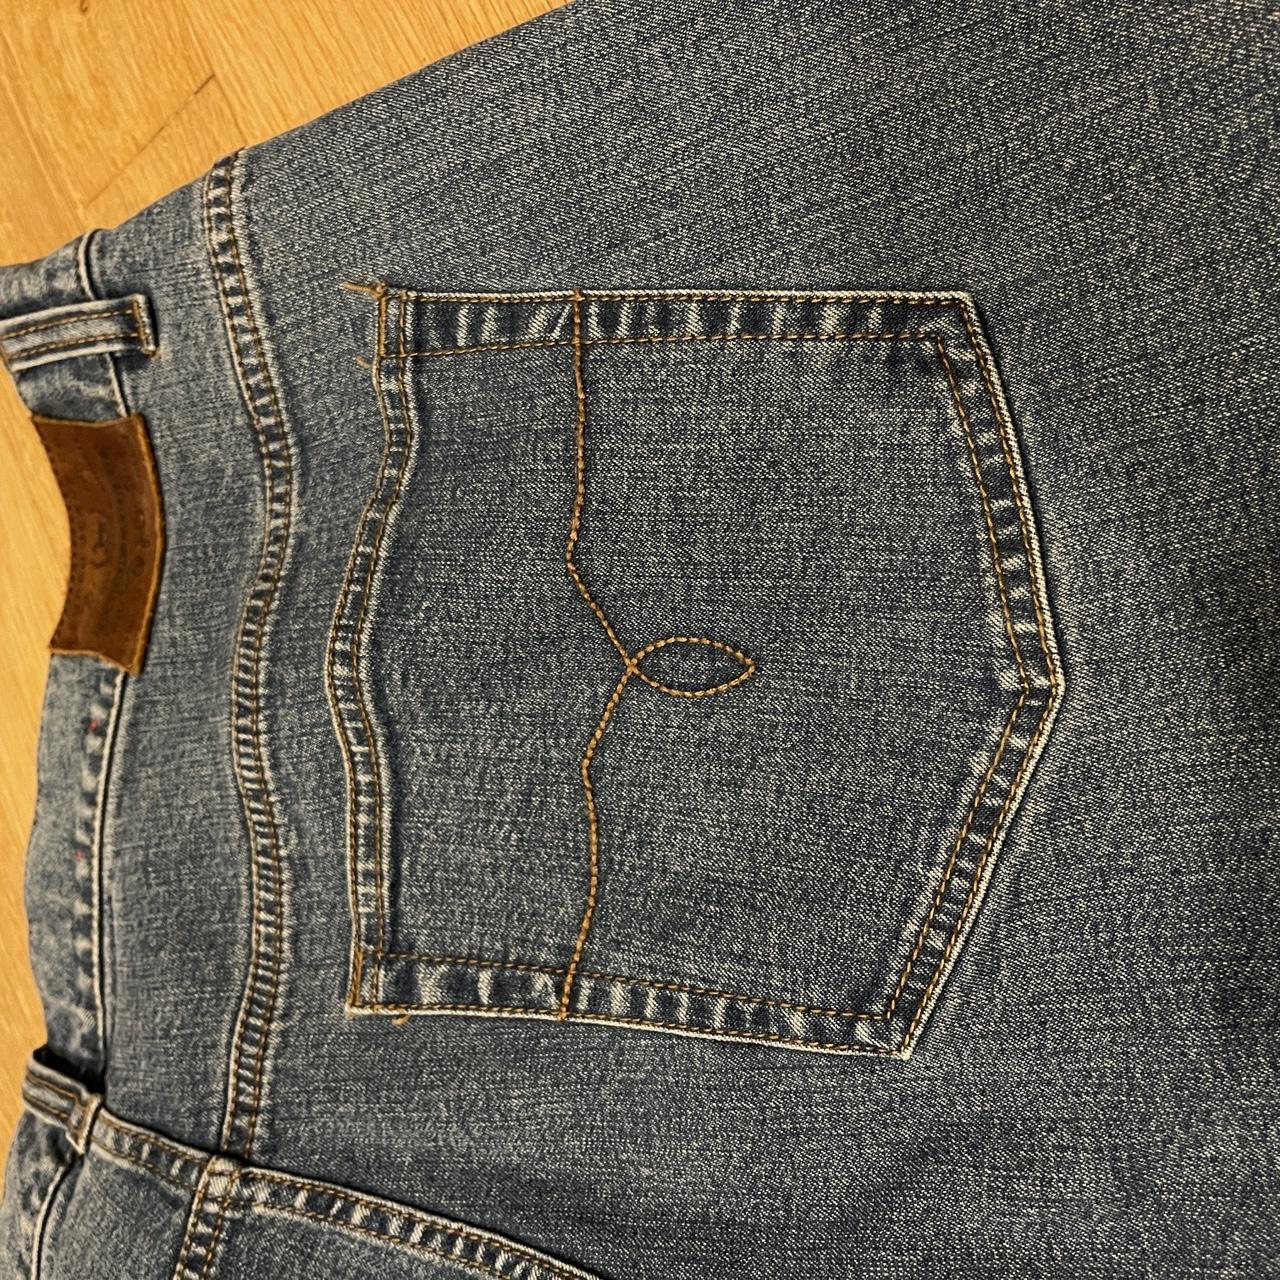 Vintage Ralph Lauren Bootcut Jeans These are a... - Depop